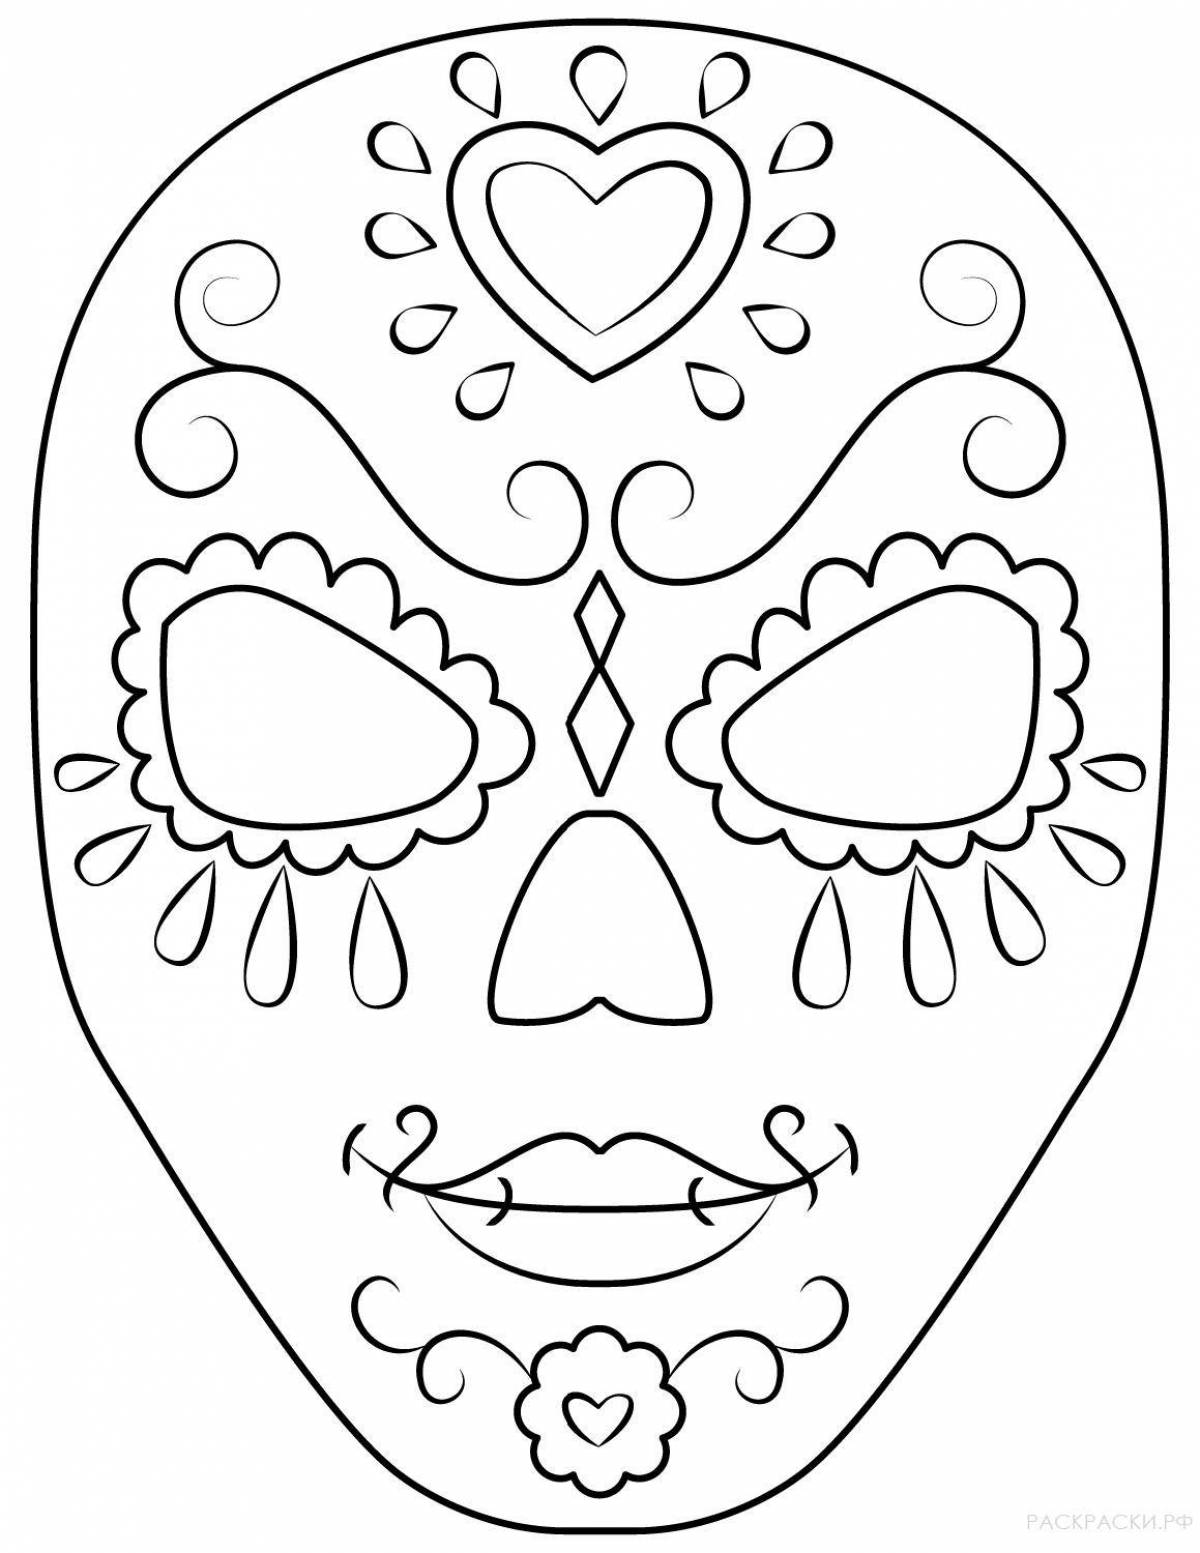 Witty fabric mask coloring book